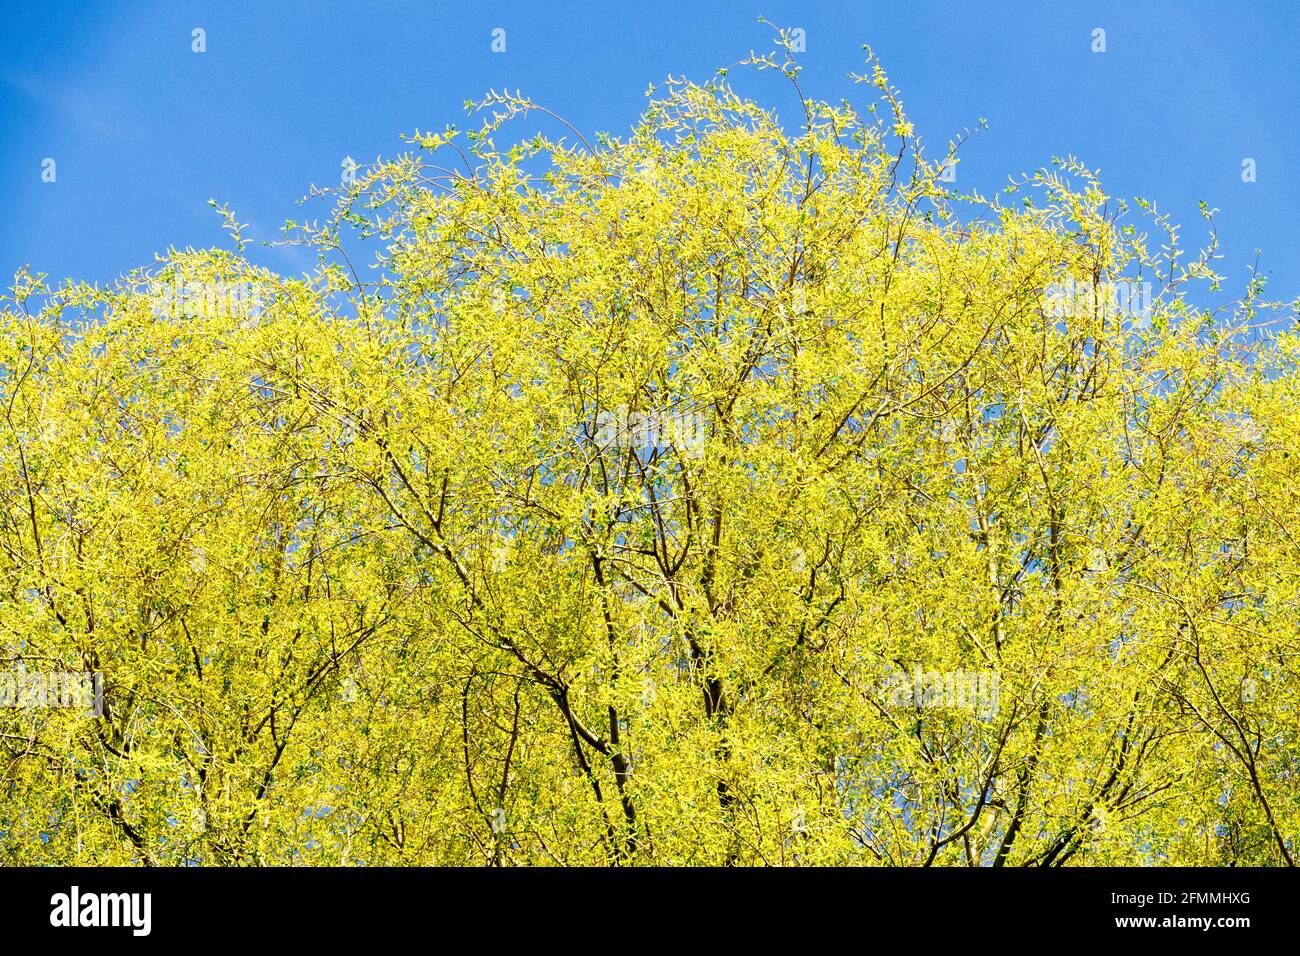 Blue yellow colors, blooming trees Crack willow against sky Salix fragilis Willow tree Stock Photo